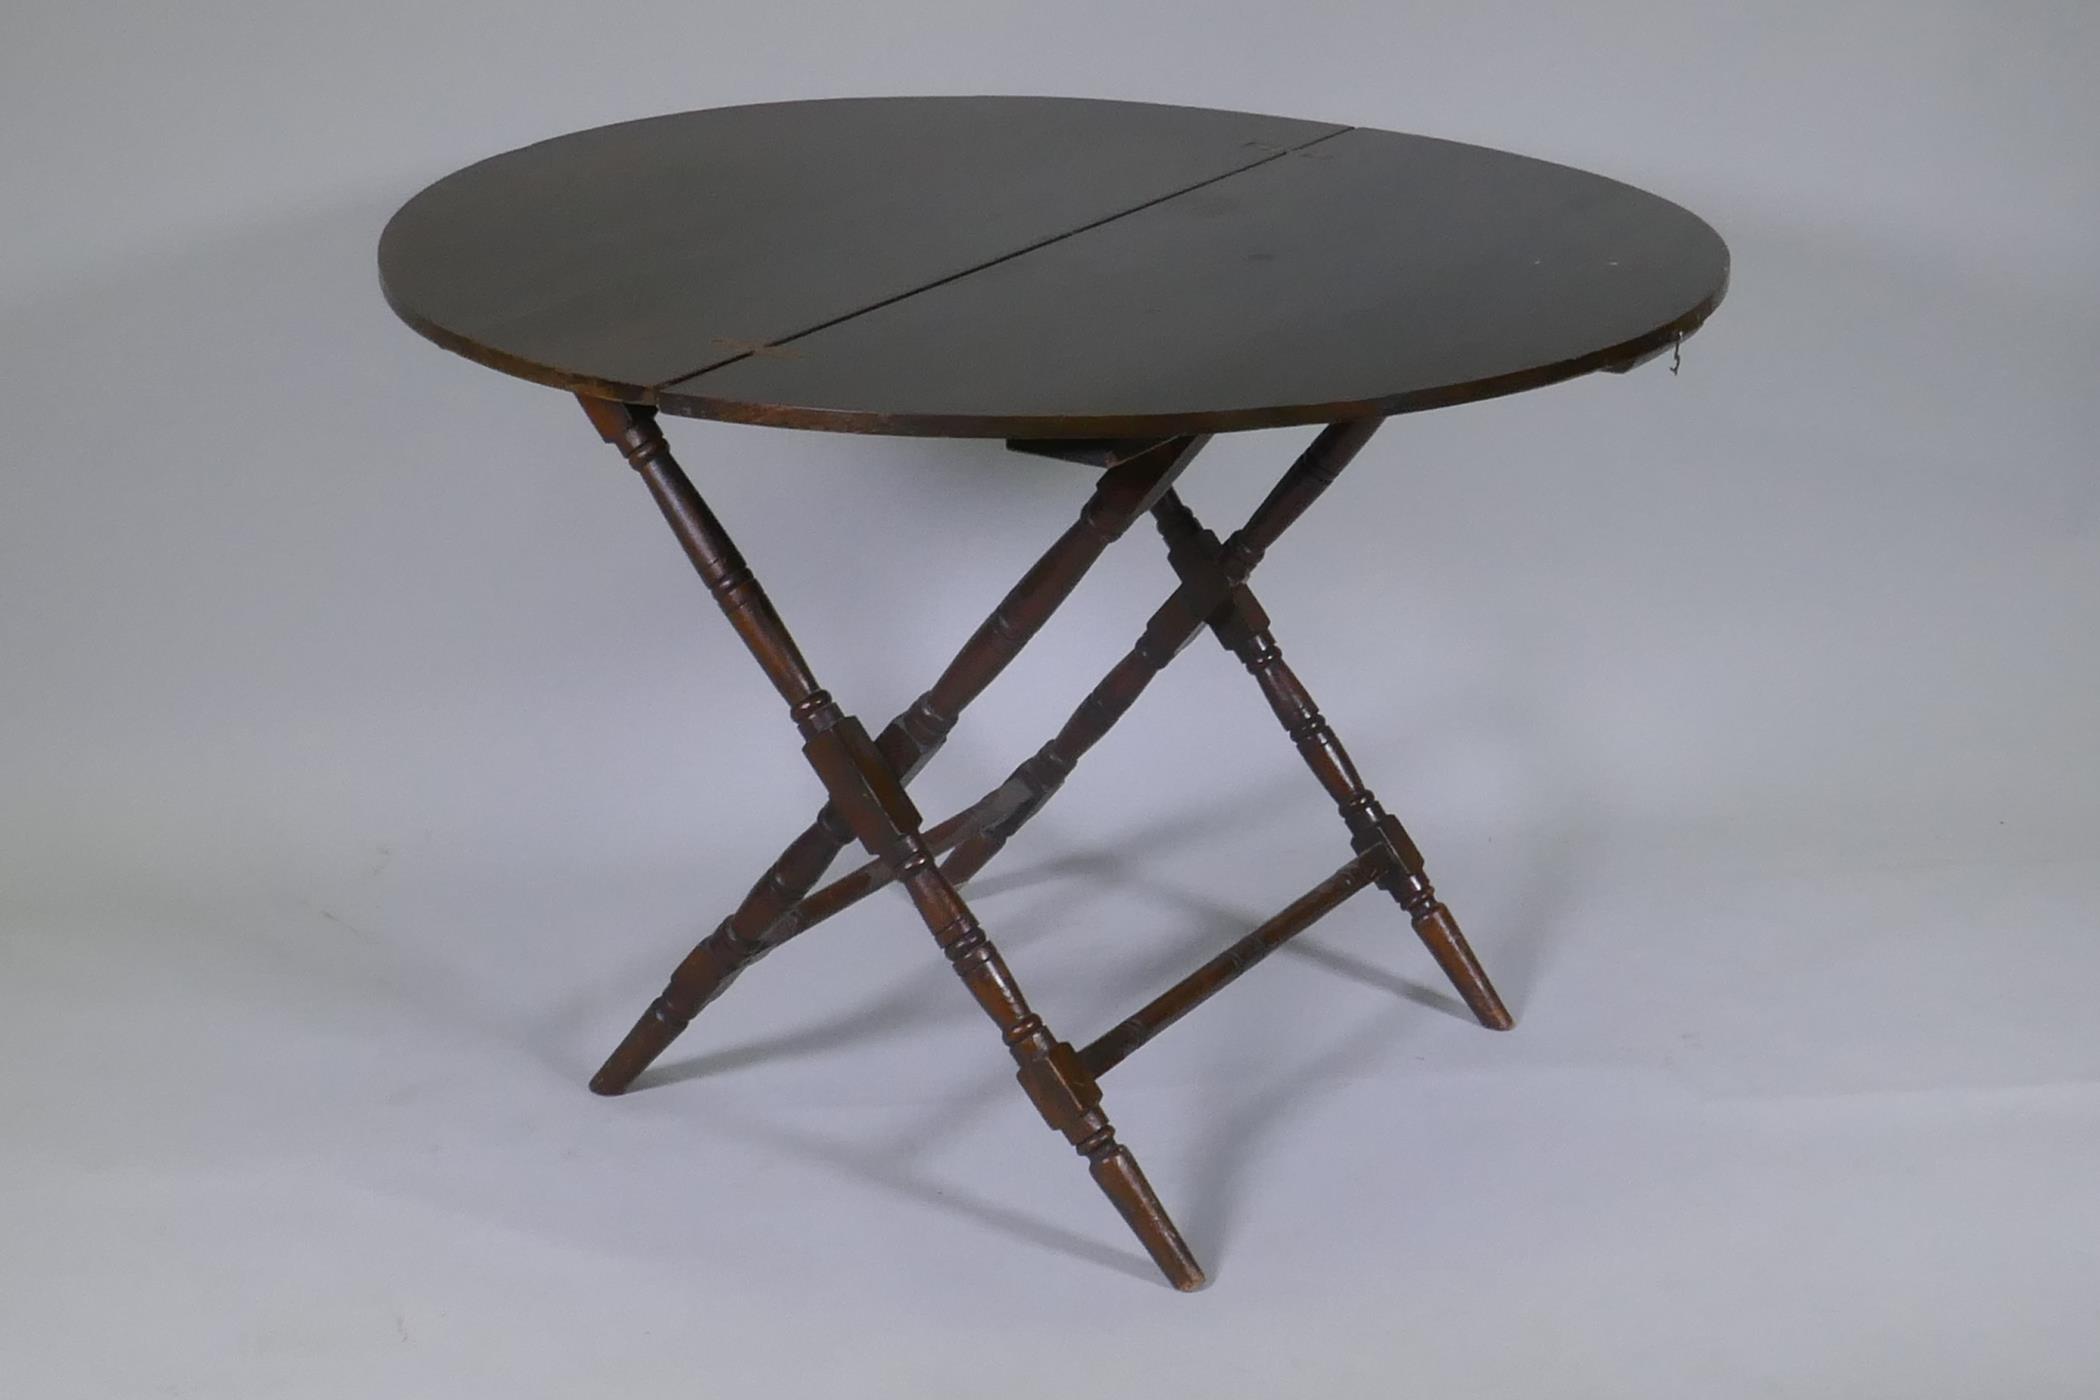 An early C20th beechwood coaching table, bears label Thornton & Herne, 13 Little Cadogan Place, Pont